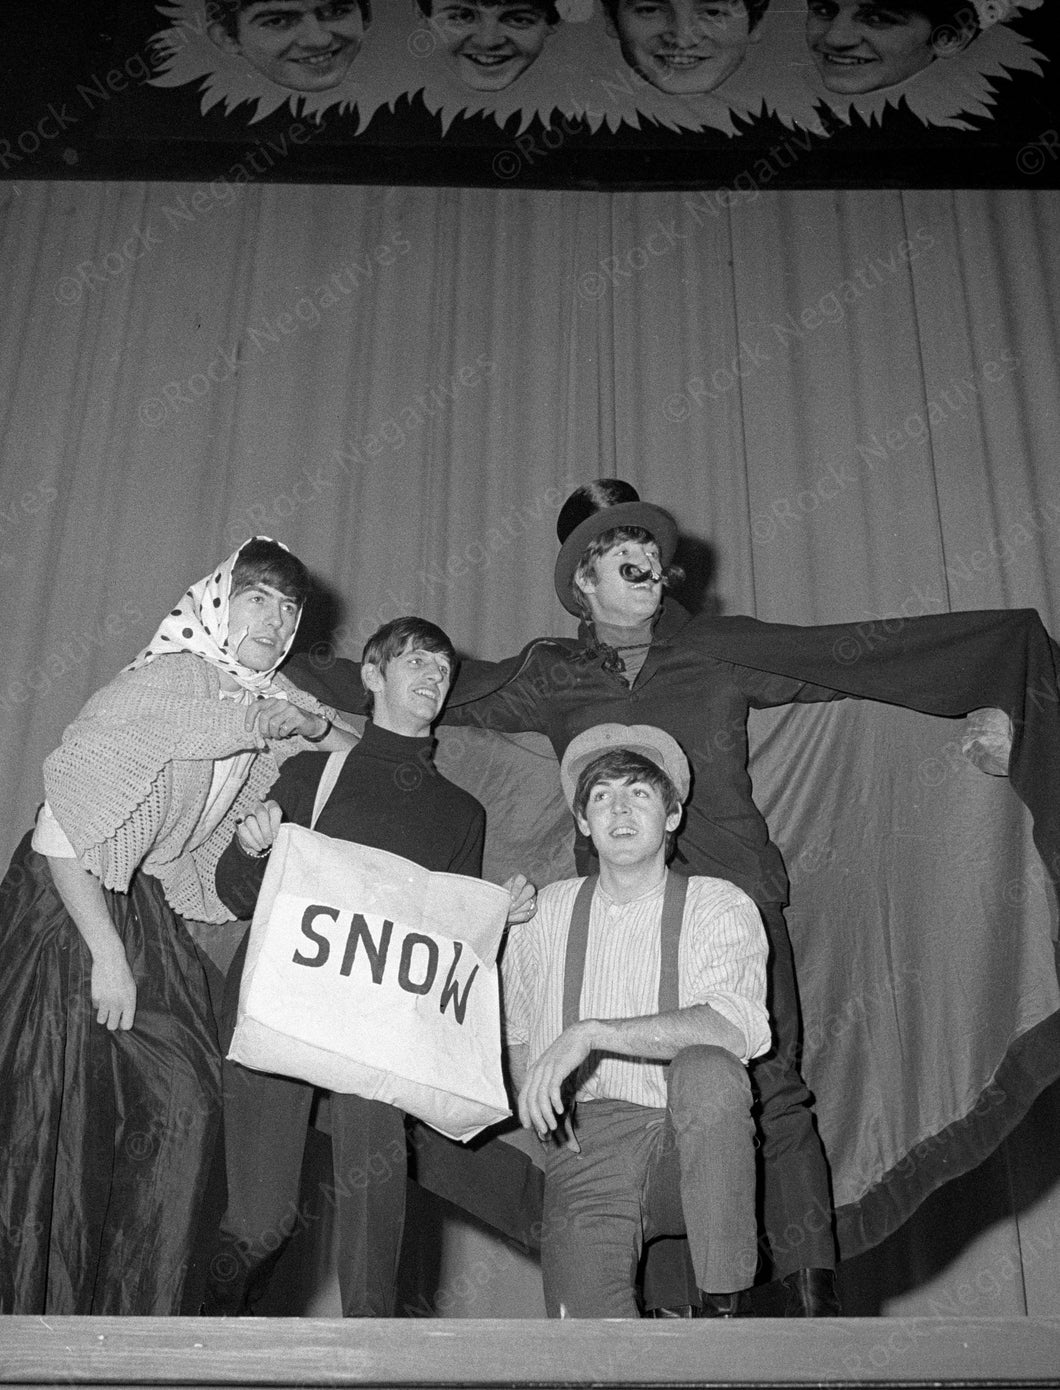 The Beatles Christmas Show in London 1963 Photo Print